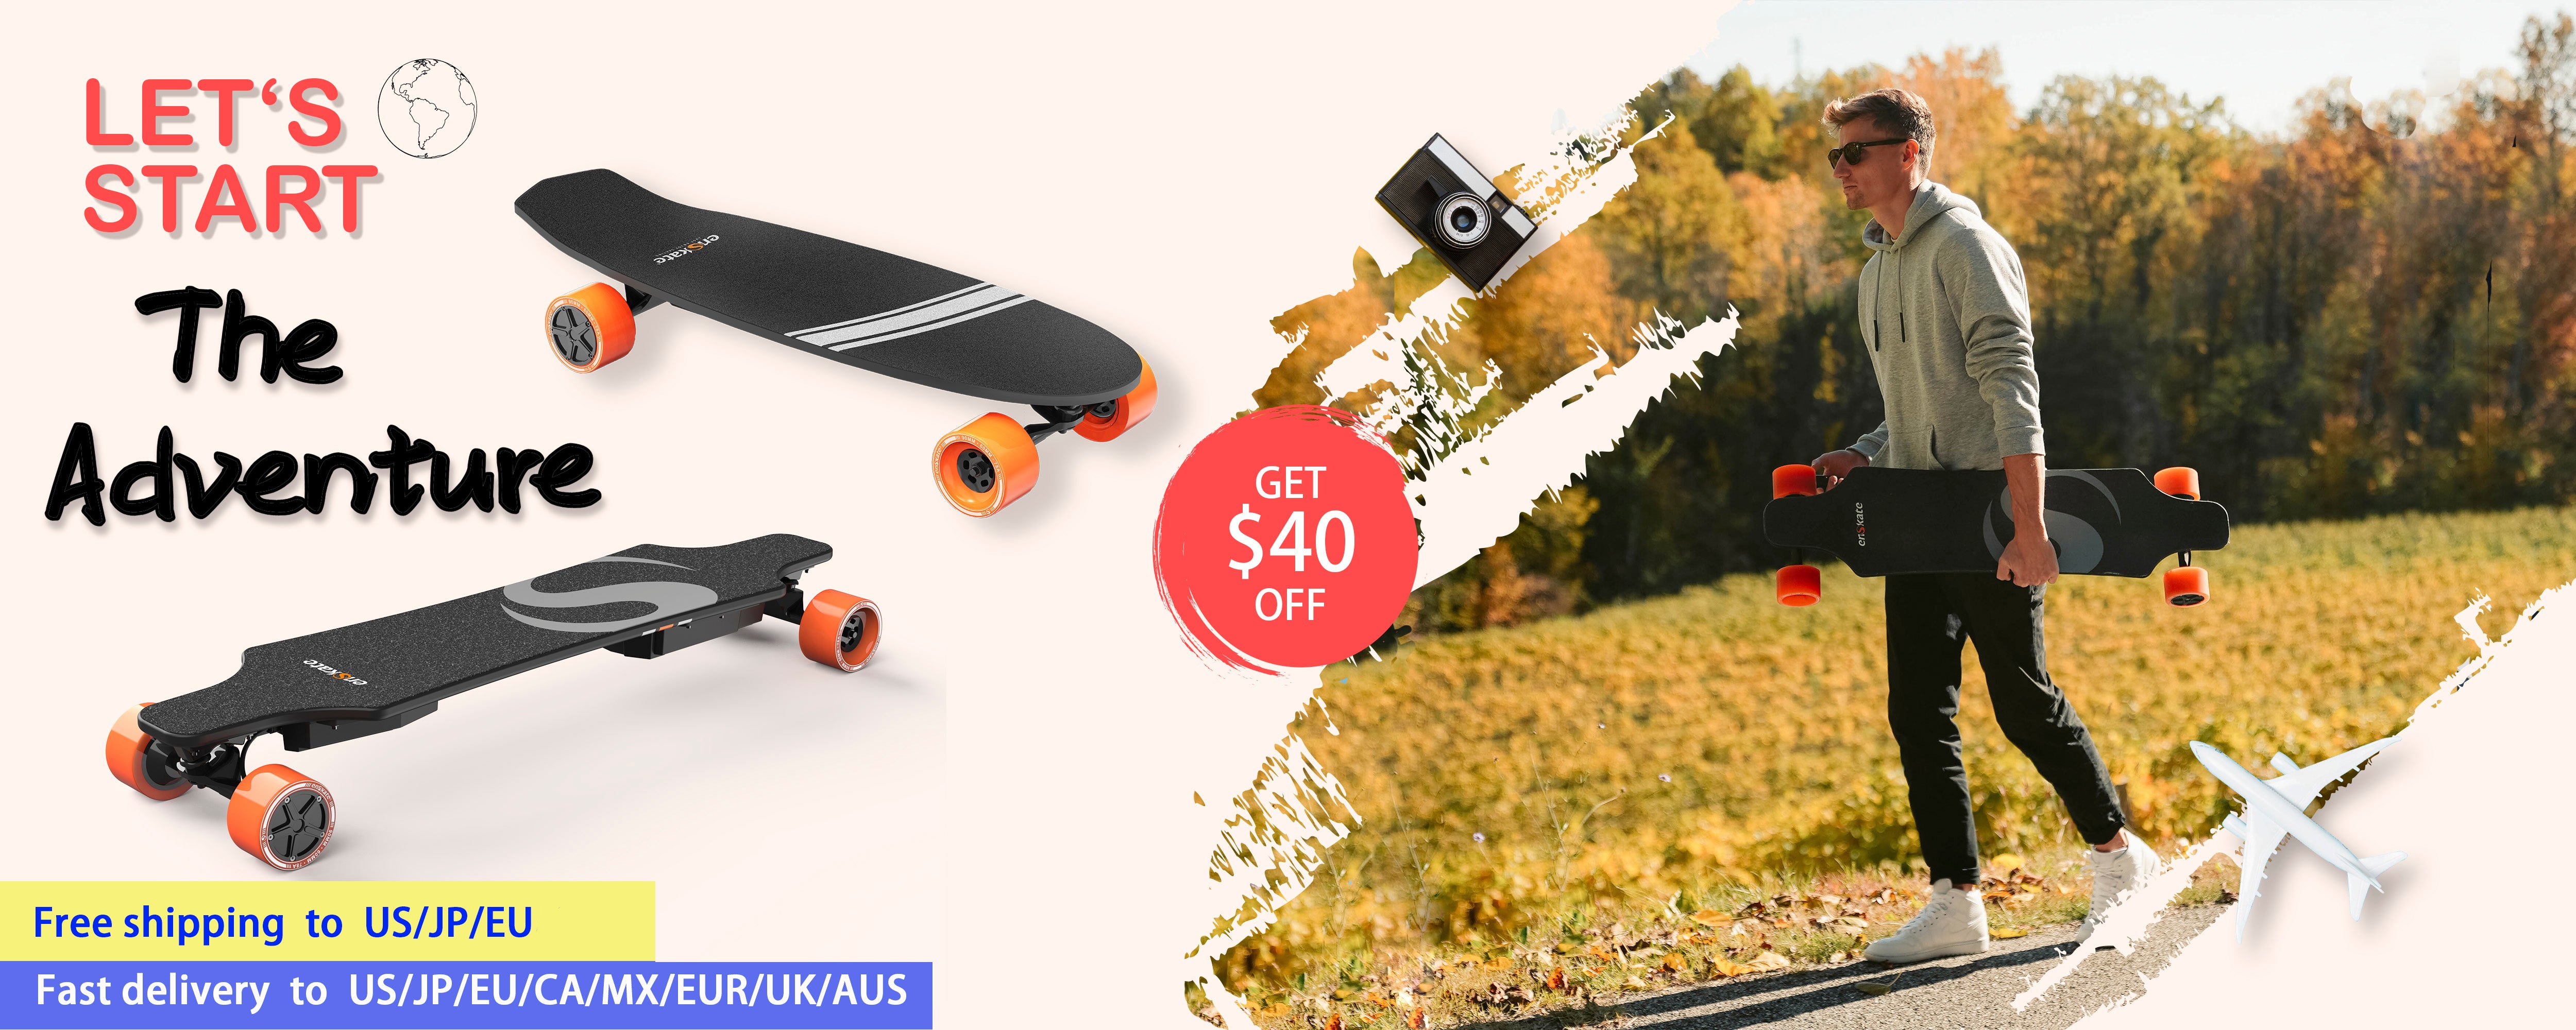 Electric Skateboards From Professional Riders | enSkate